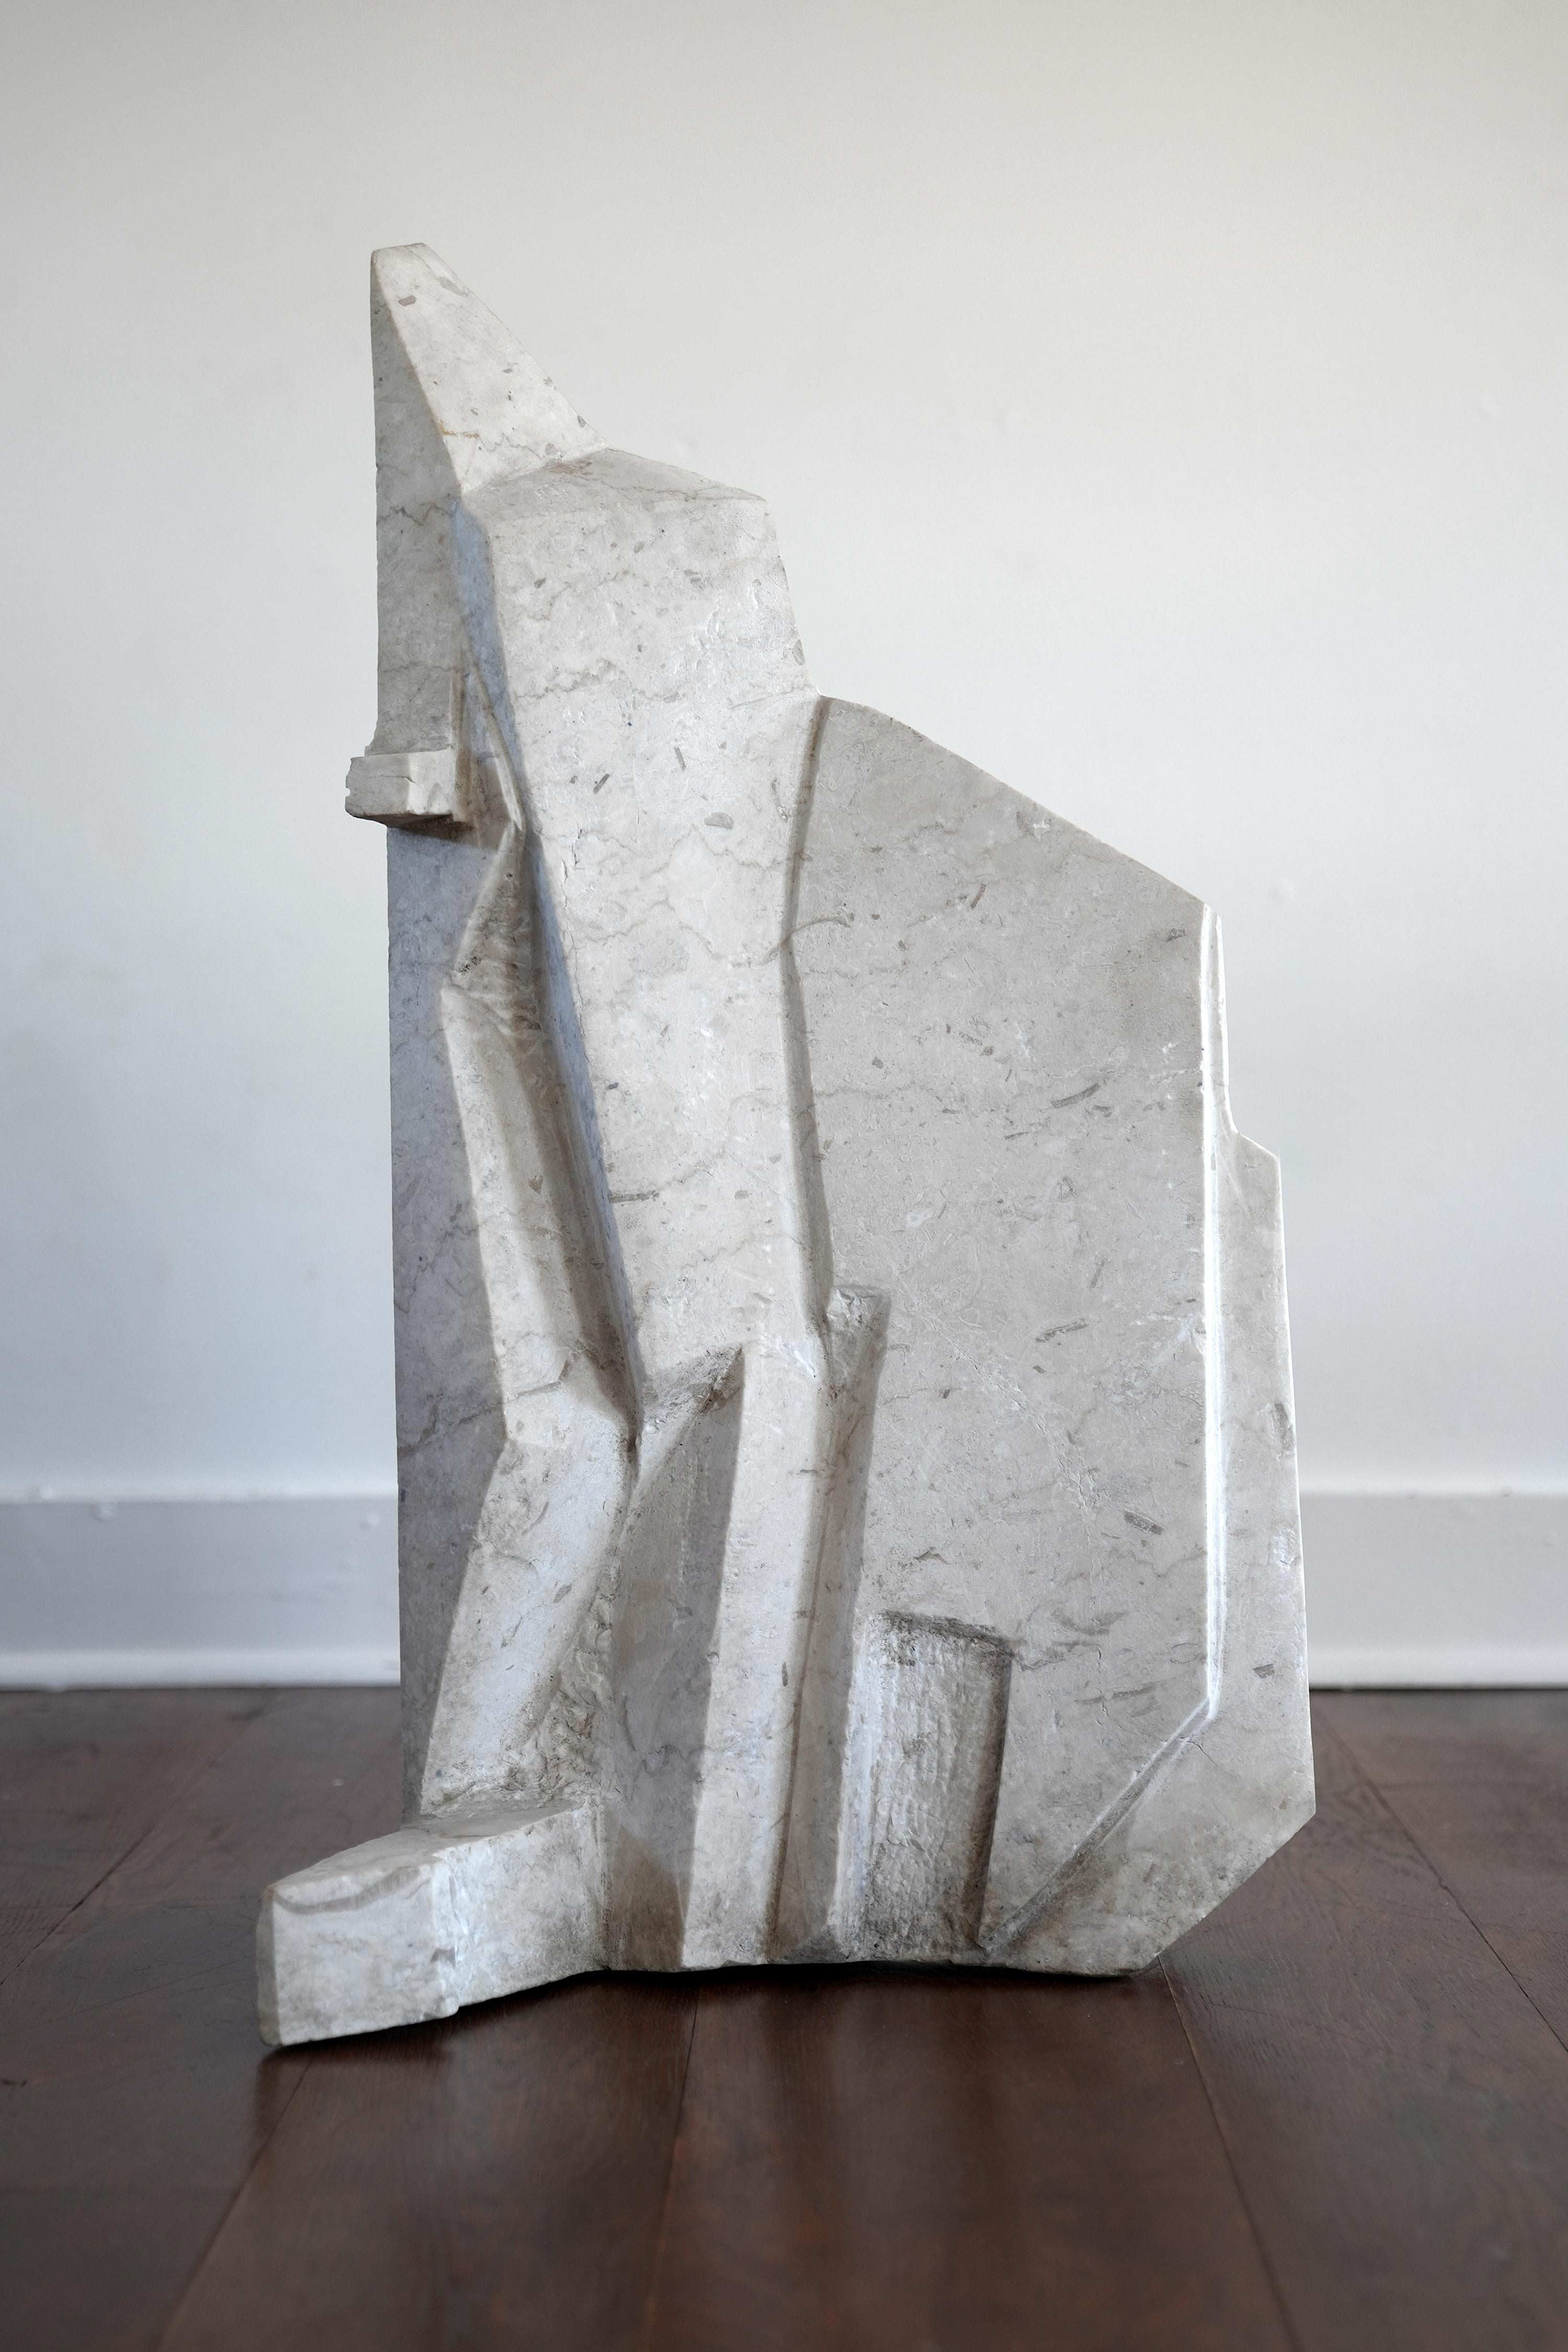 Architectural Abstract Marble Sculpture
unsigned. modernist. mid to late 20th c.
Contact me with any questions or for shipping quotes